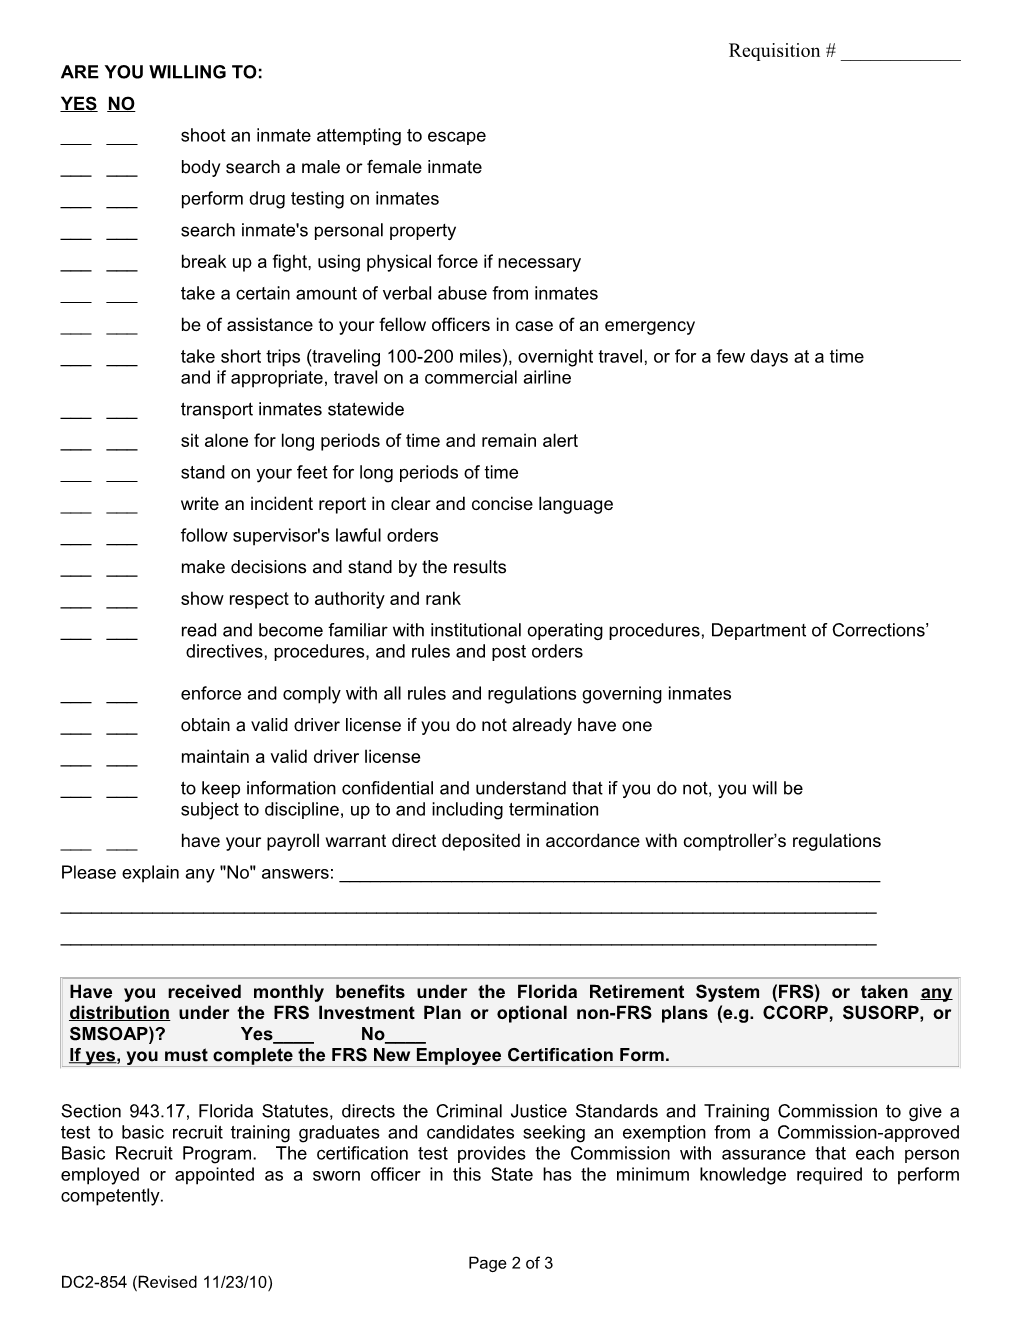 DC2-854 Correctional Officer Willingness Questionnaire (Revised 11/23/10)